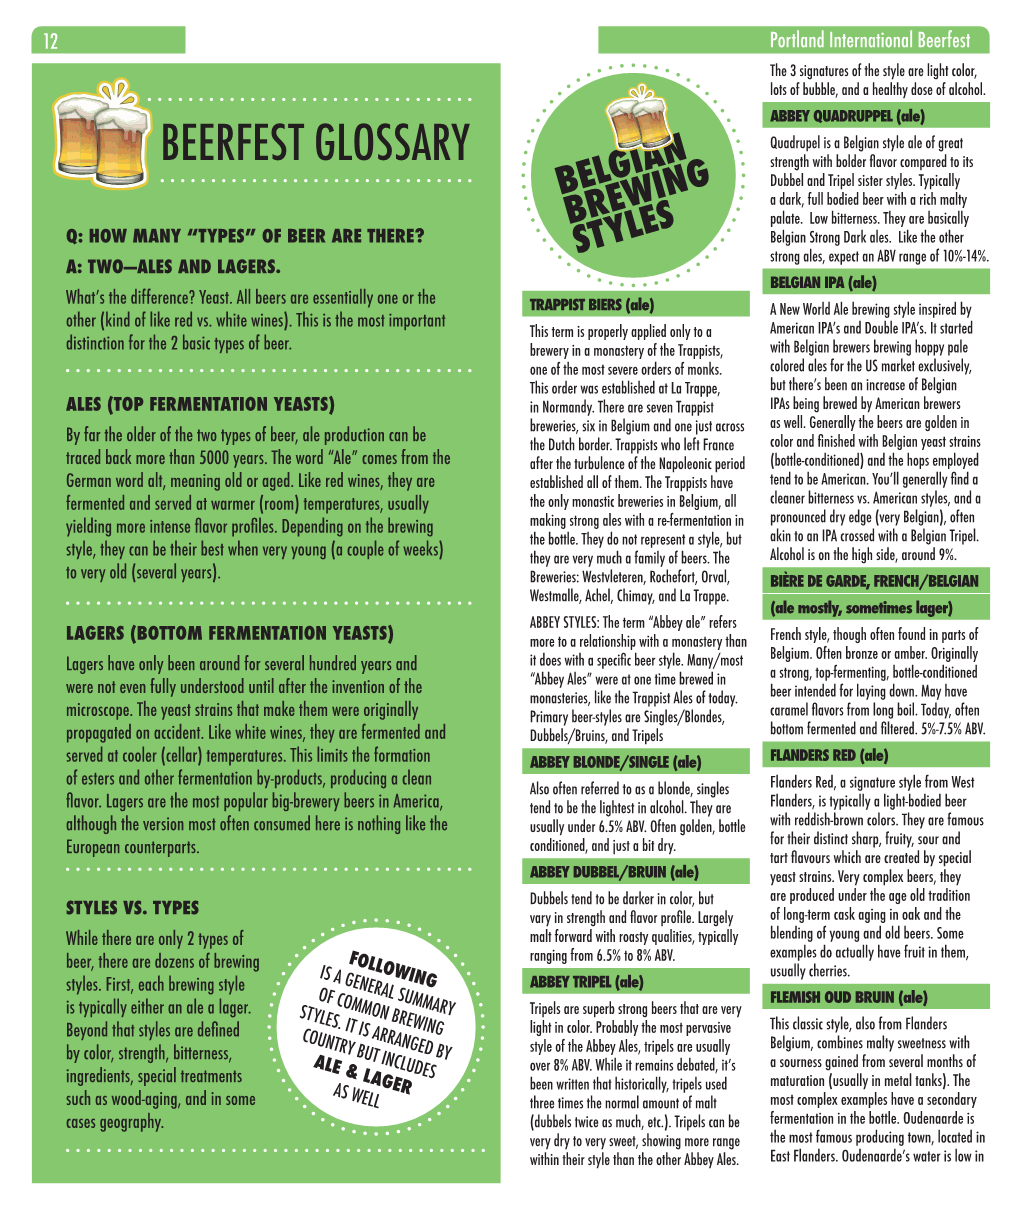 GLOSSARY Strength with Bolder Flavor Compared to Its Dubbel and Tripel Sister Styles